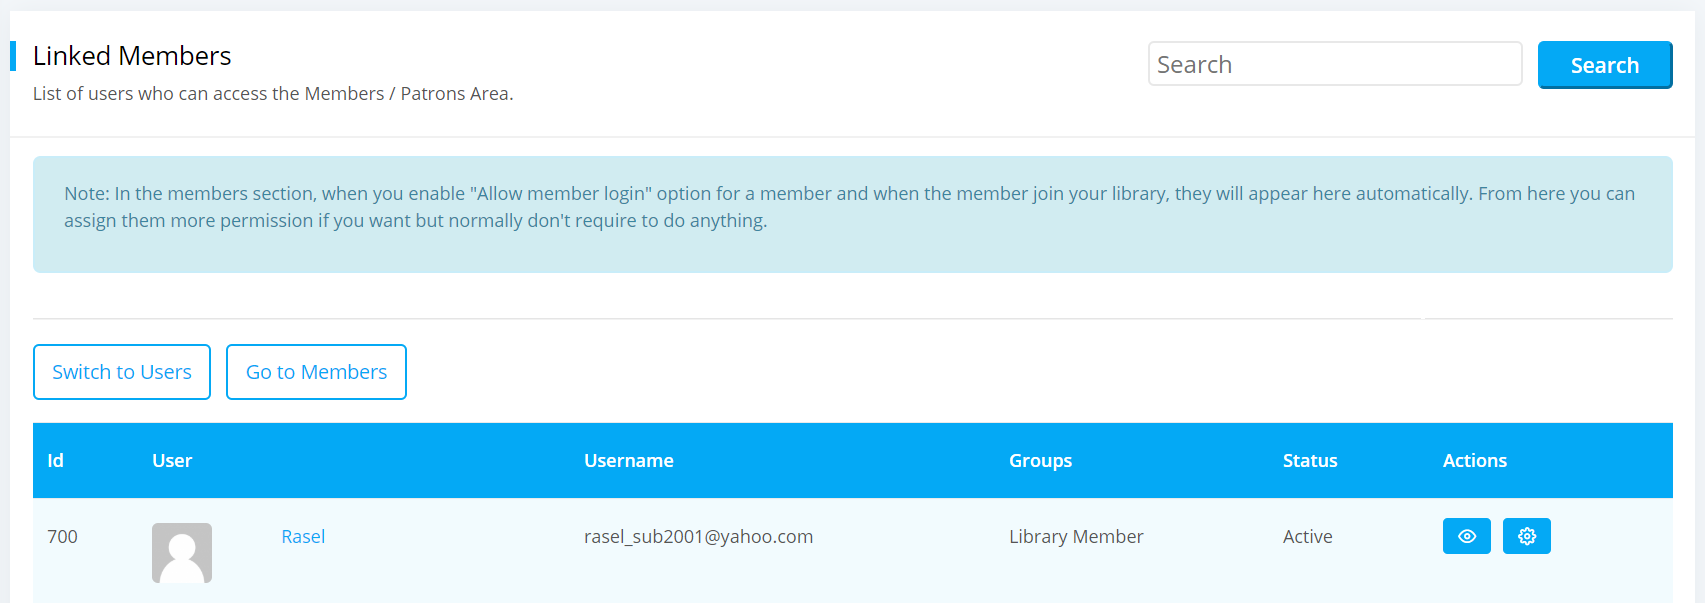 Users linked members page